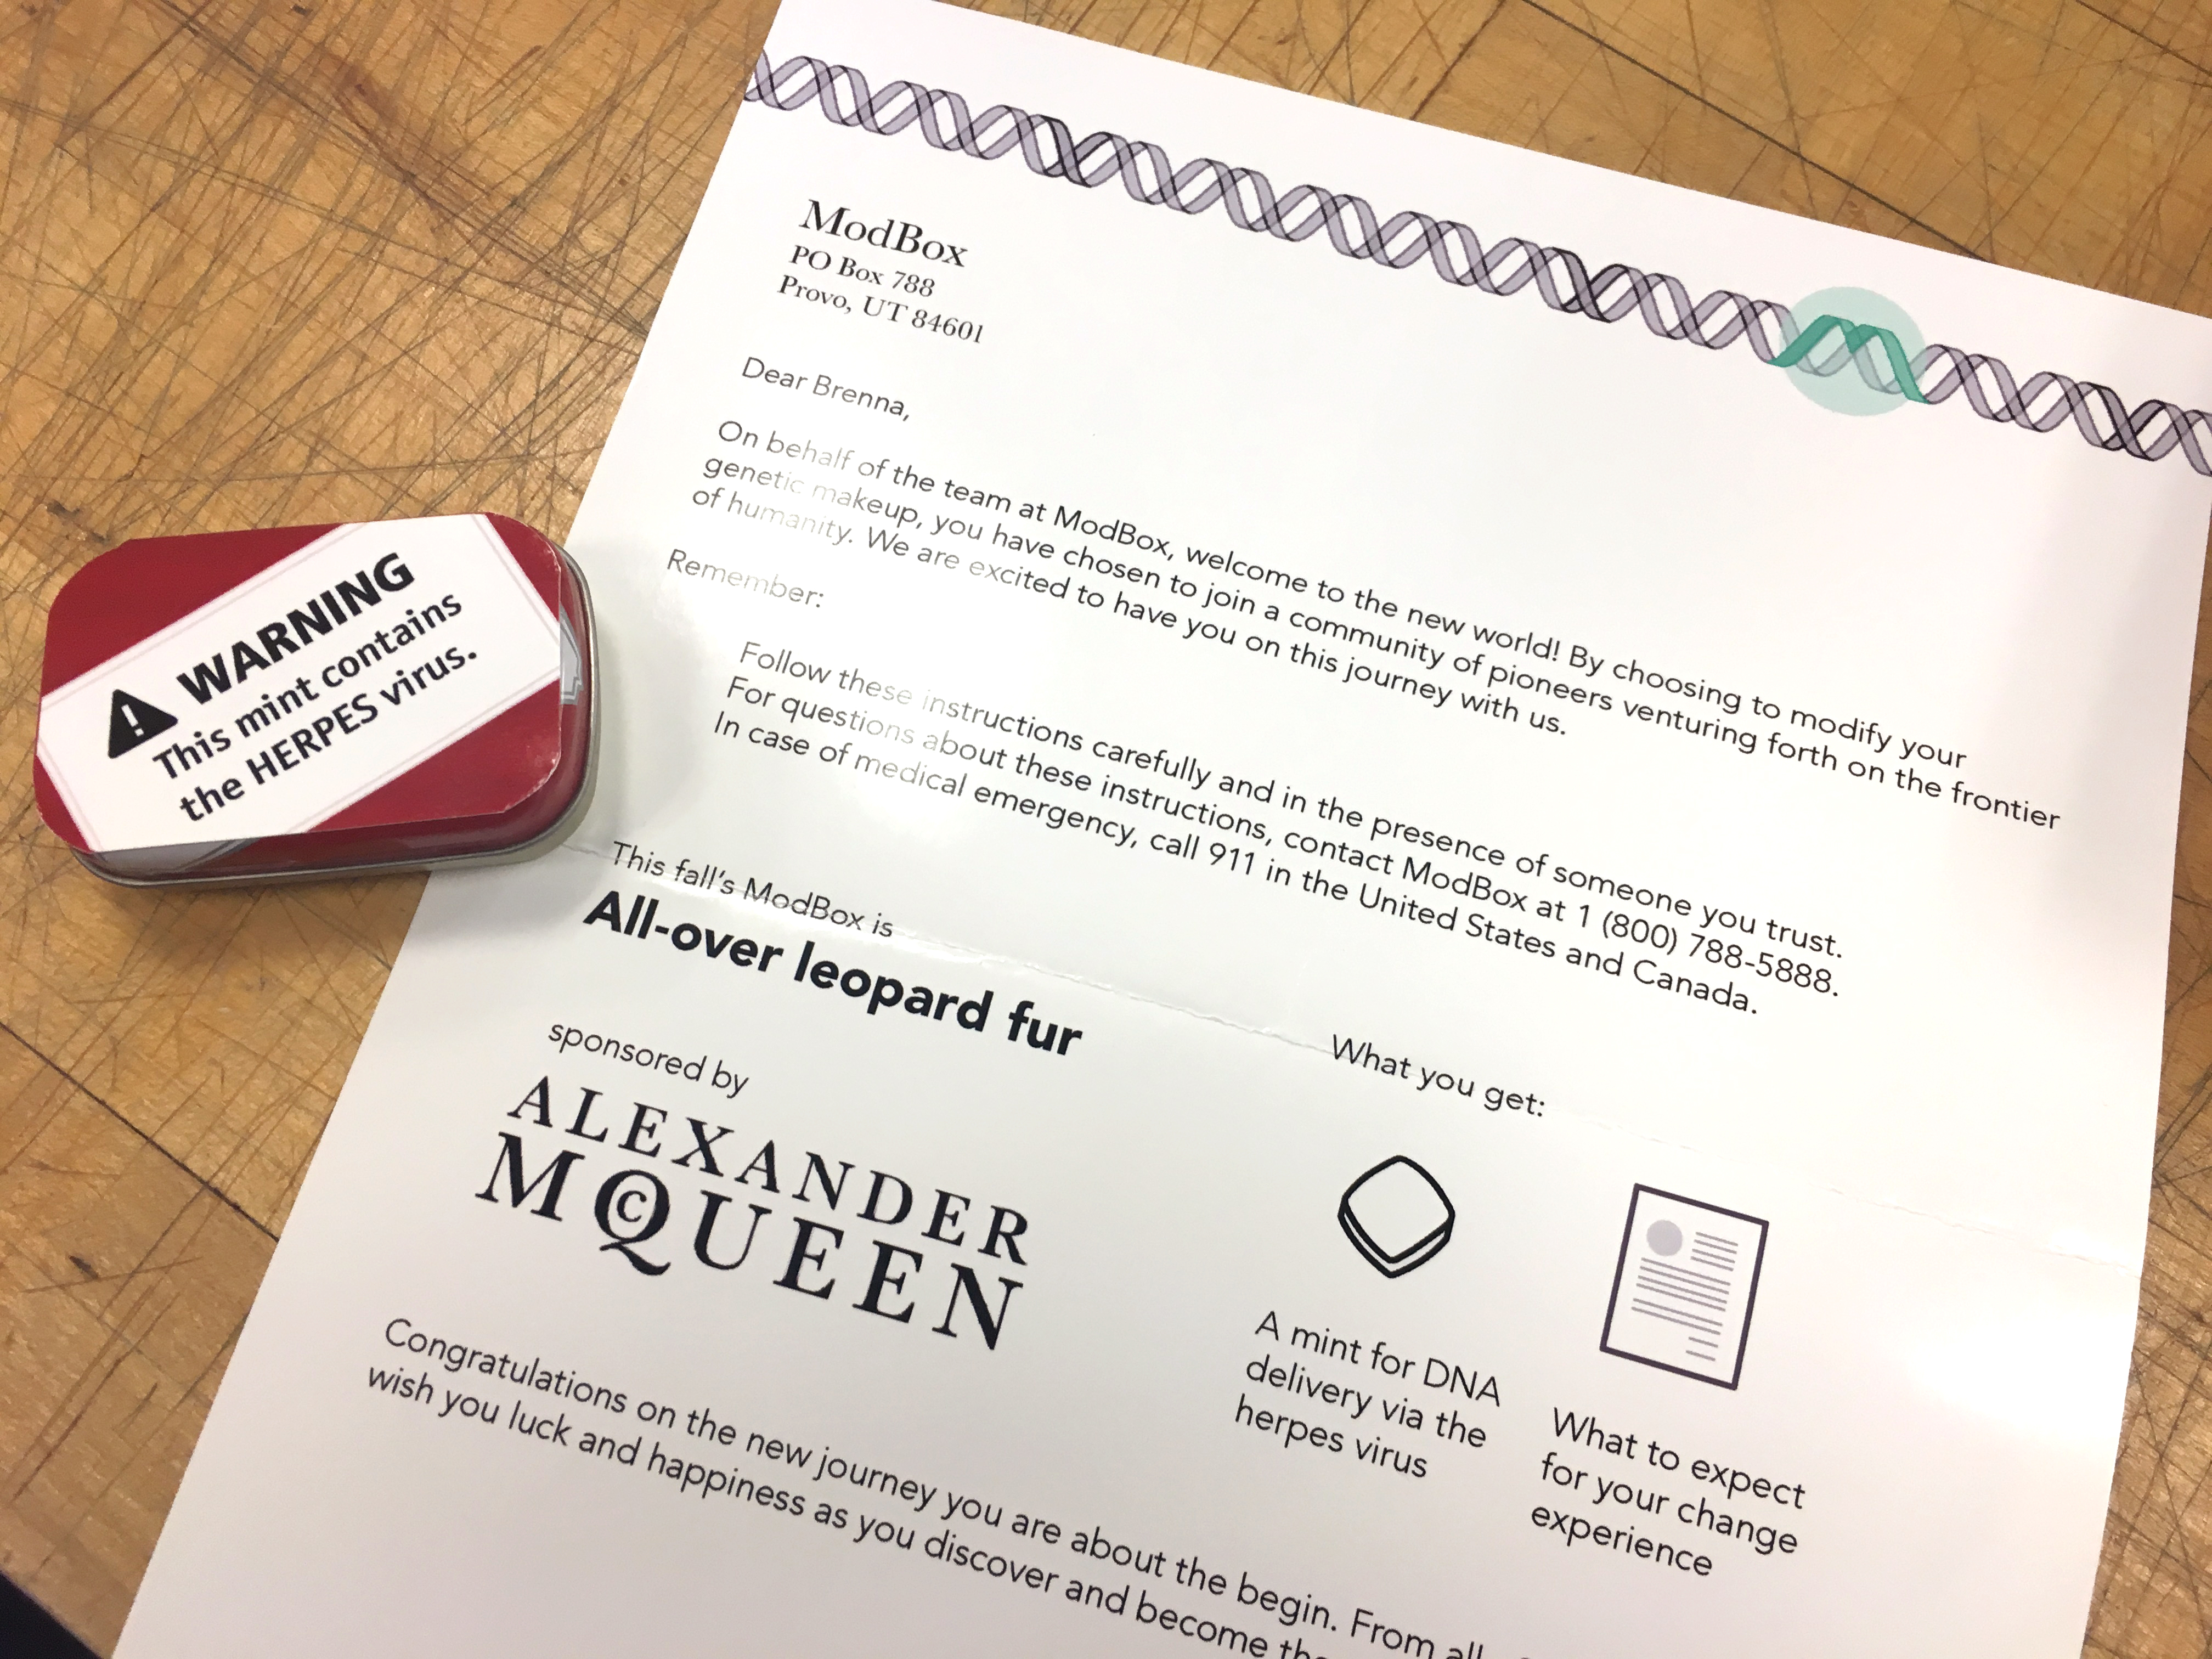 A letter welcomes another customer to the frontier of humanity with supplies to genetically modify a human with all-over leopard fur. It's sponsored by Alexander McQueen. There is a mint tin that contains the herpes virus, how the genetic modifcation is delivered.